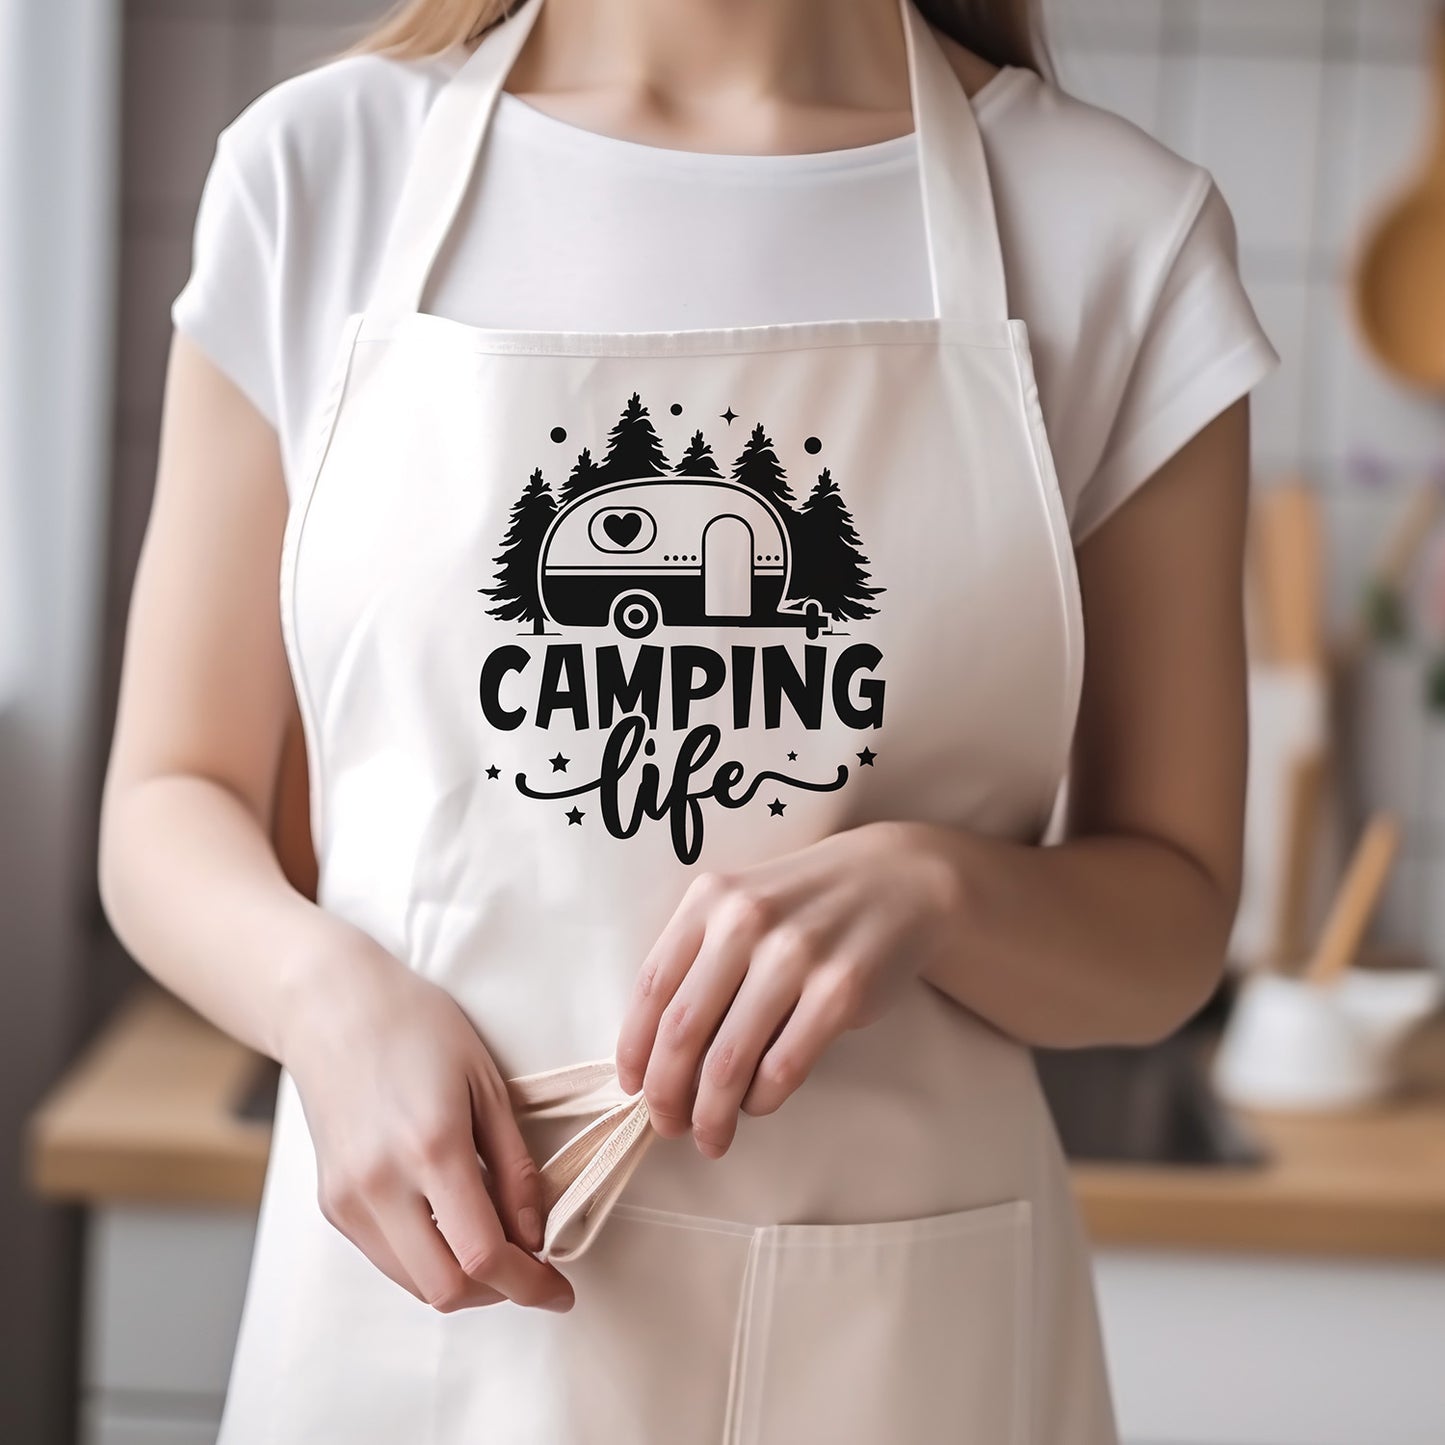 "Camping Life" With Camper Graphic